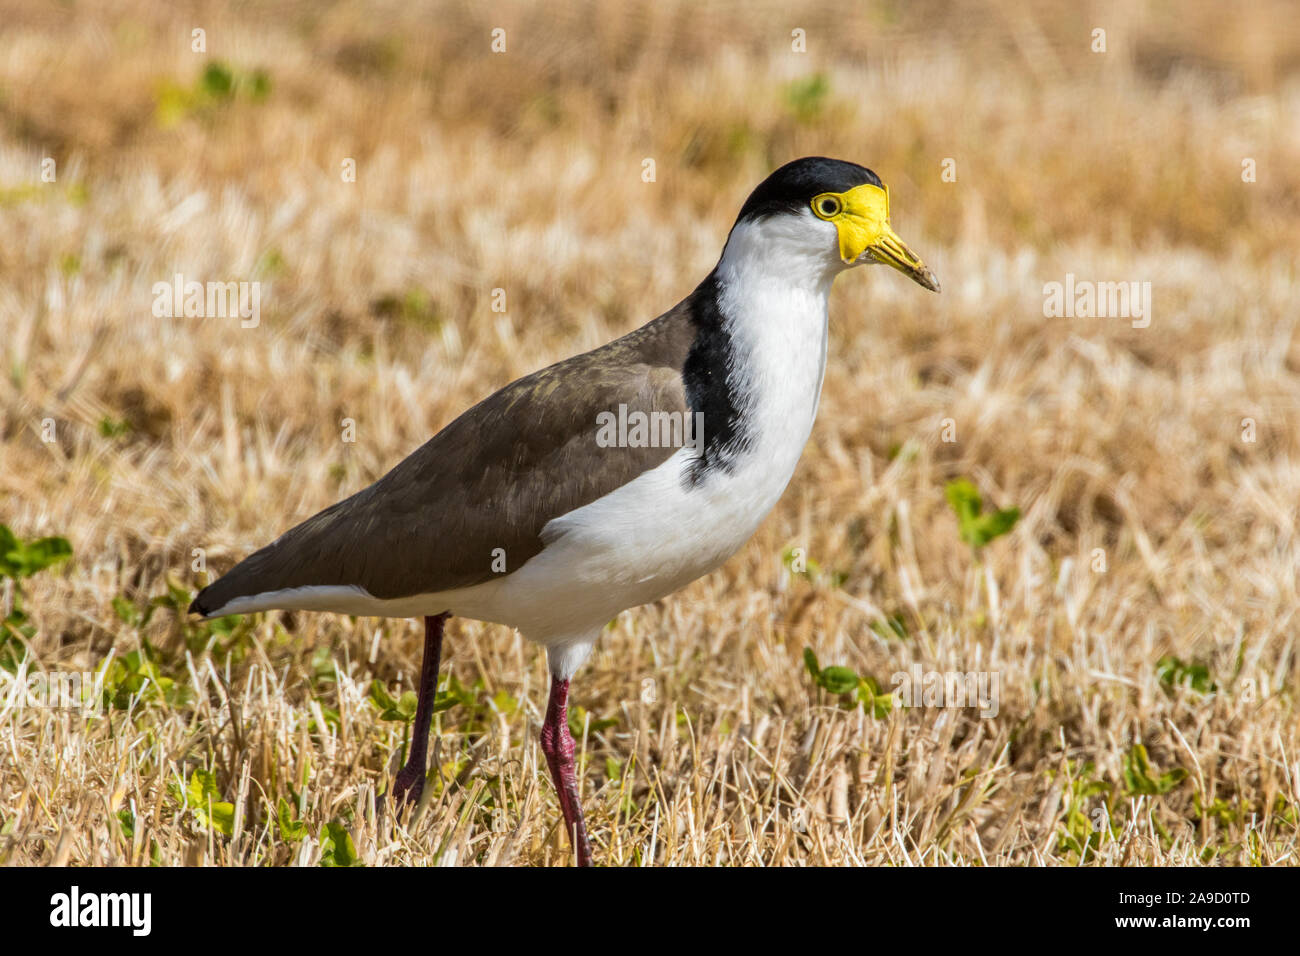 Spur-winged plover ( Vanellus miles ) Stock Photo